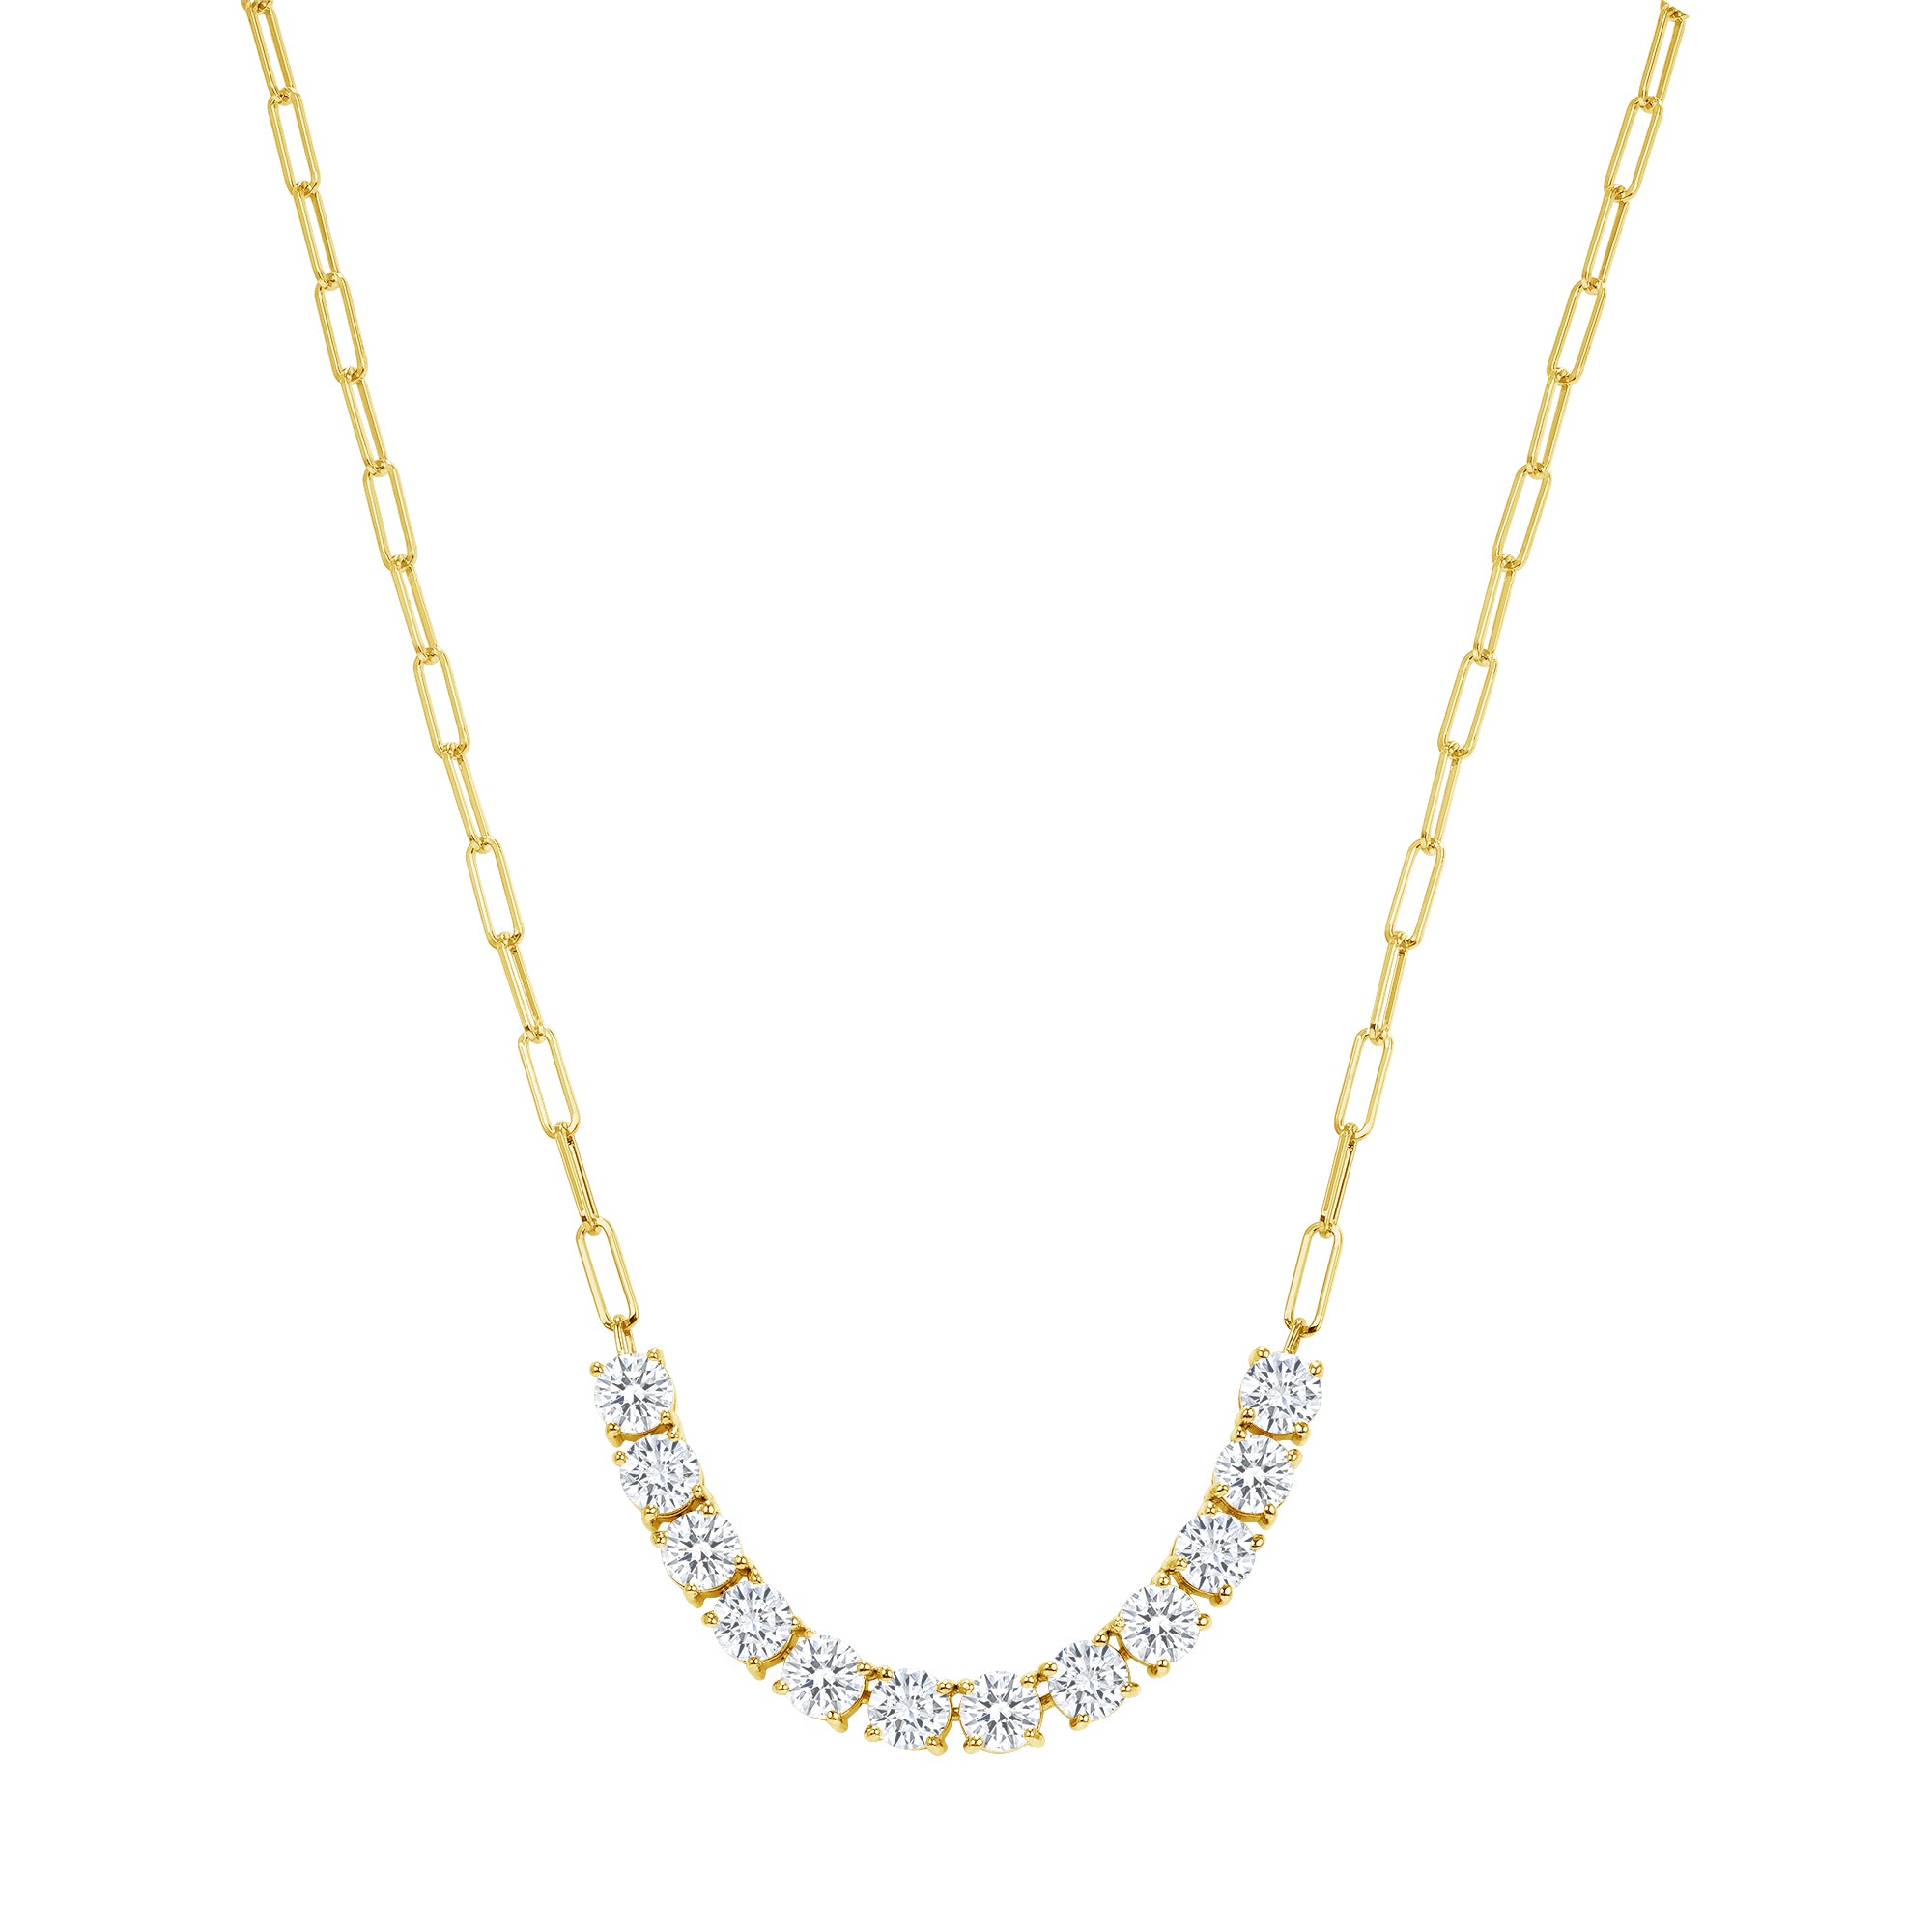 3.04ct. Round Brilliant Floating Diamond Necklace in 18K Yellow Gold